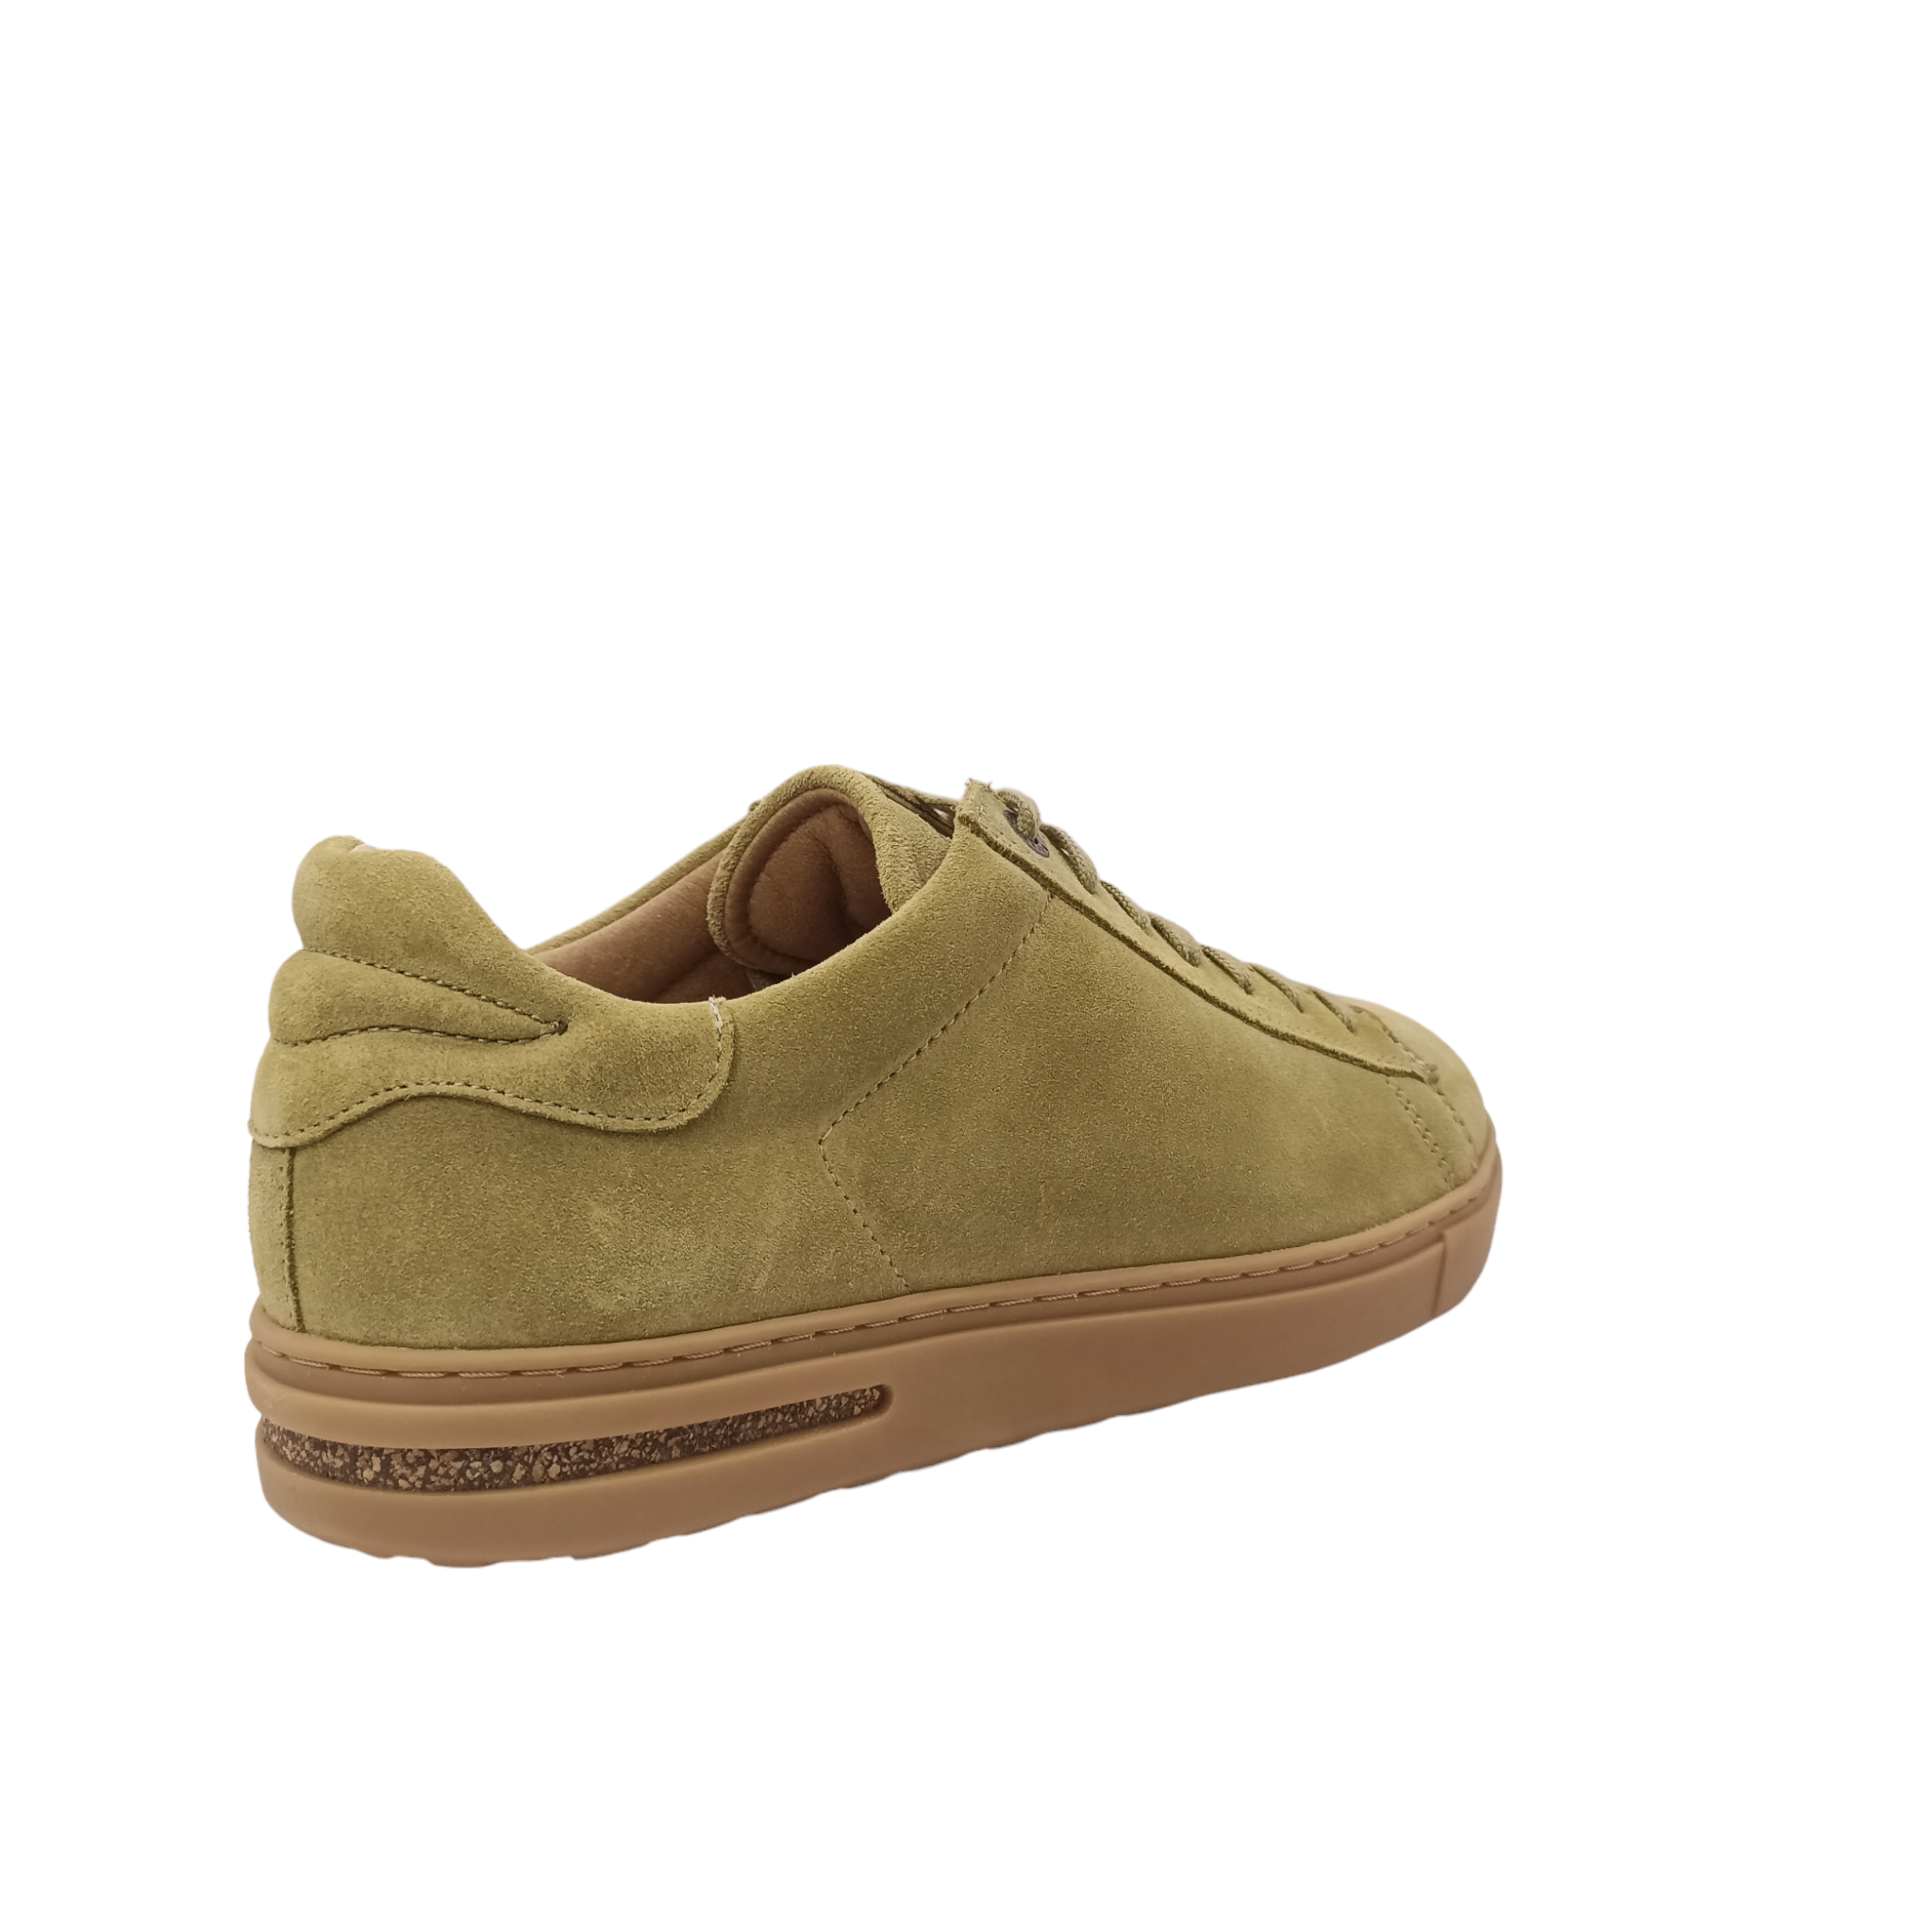 Shop Women's Birkenstock shoes. Back Angled view of Khaki Suede Sneaker with tan coloured sole with a small cork line around the heel. Green Laces with a padded heel. Shop Birkenstock Shoes Online and In-store with shoe&me Mount Maunganui NZ